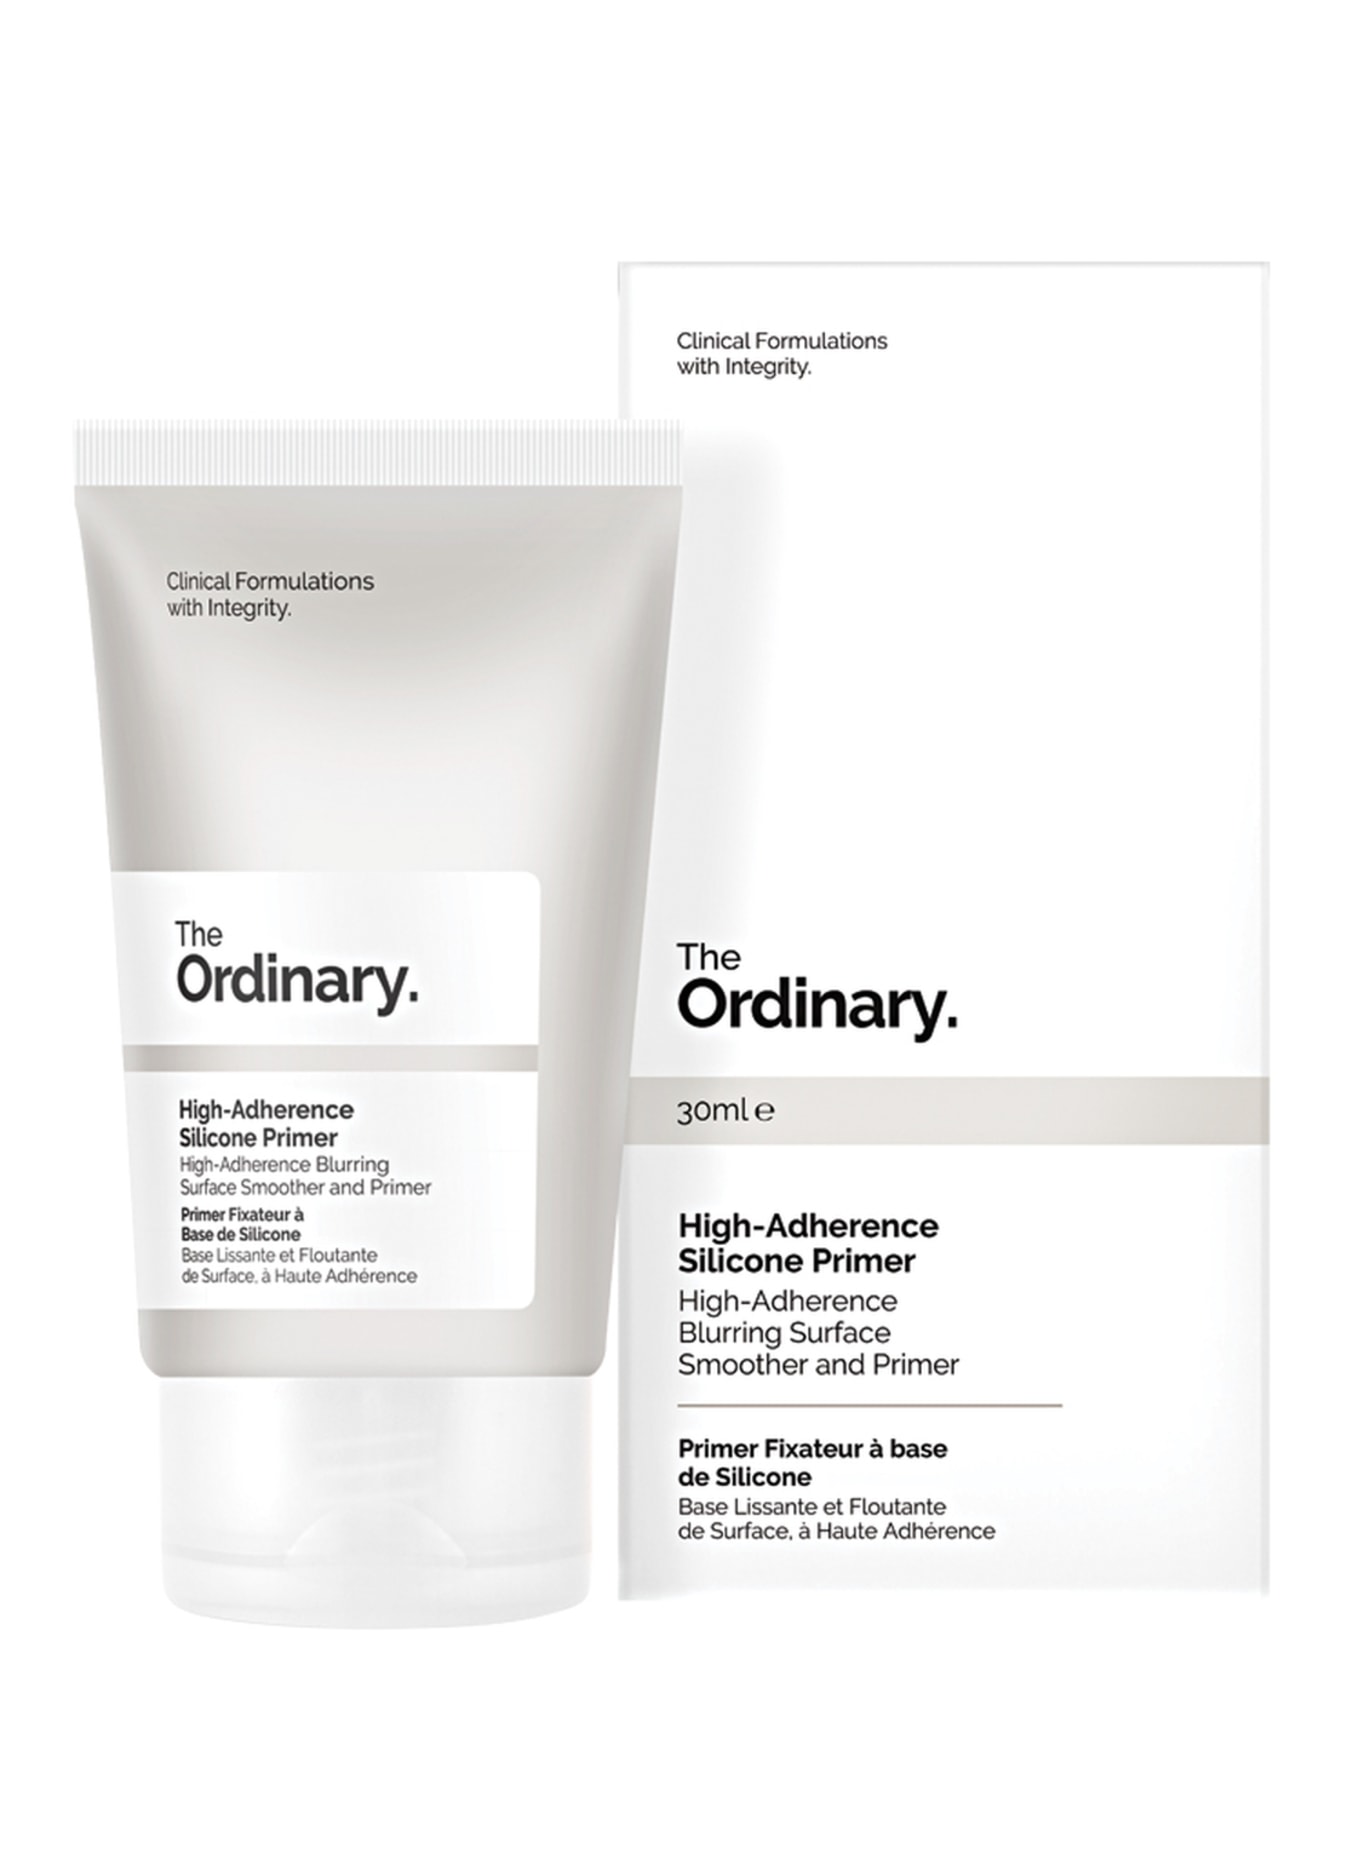 The Ordinary. HIGH-ADHERENCE SILICONE PRIMER (Bild 1)